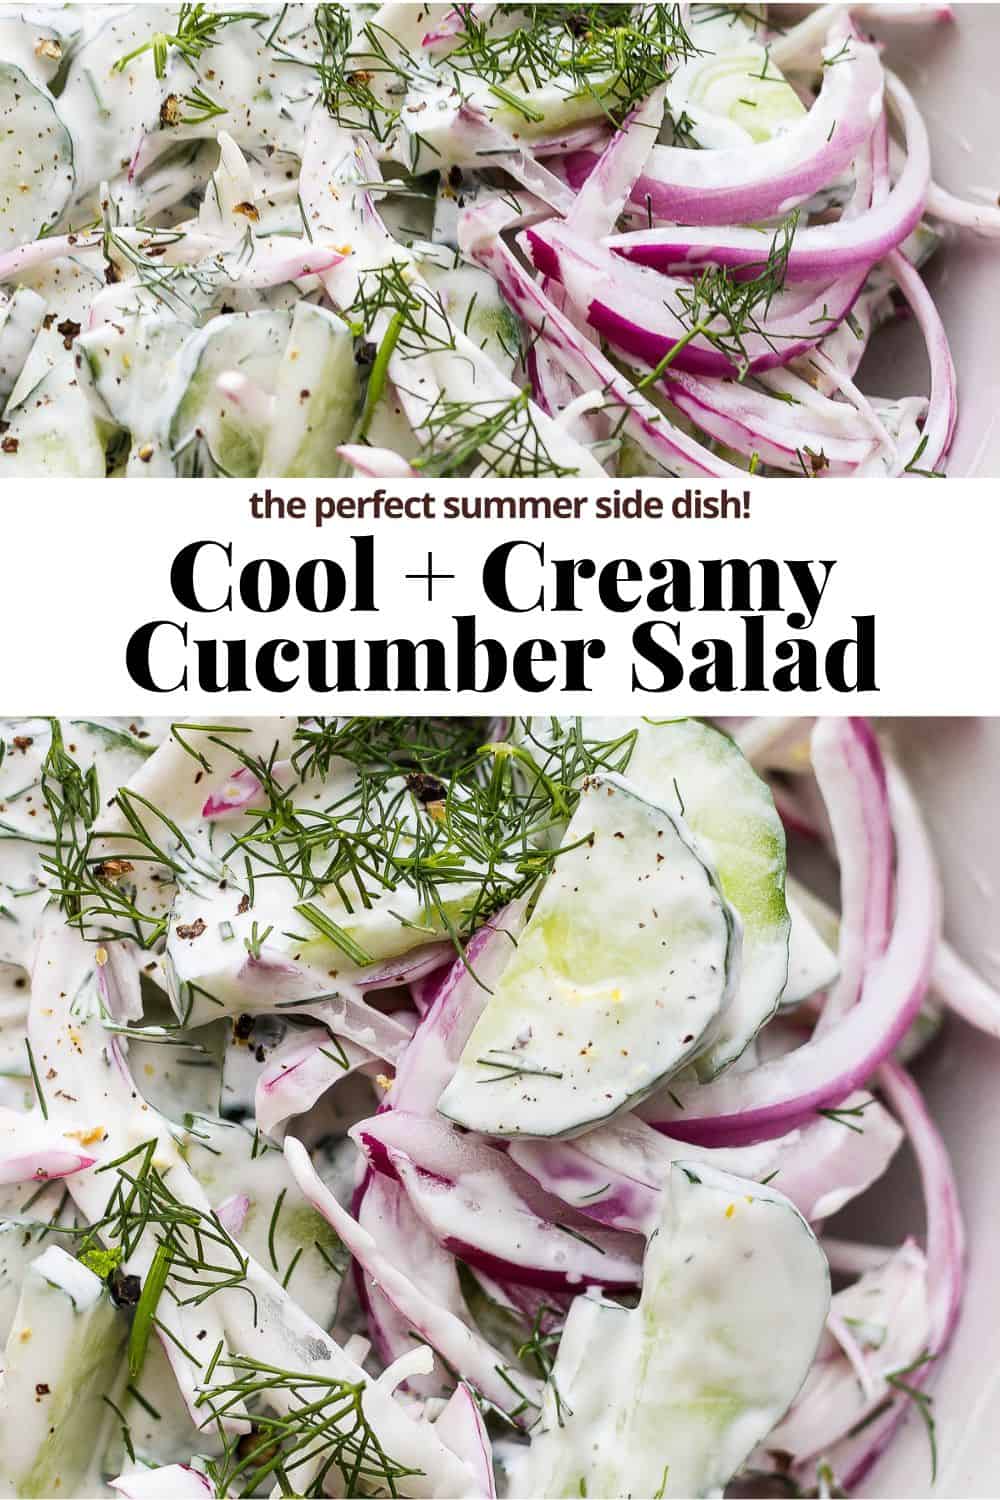 Pinterest image showing creamy cucumber salad with the title "cool + creamy cucumber salad" written across the image.